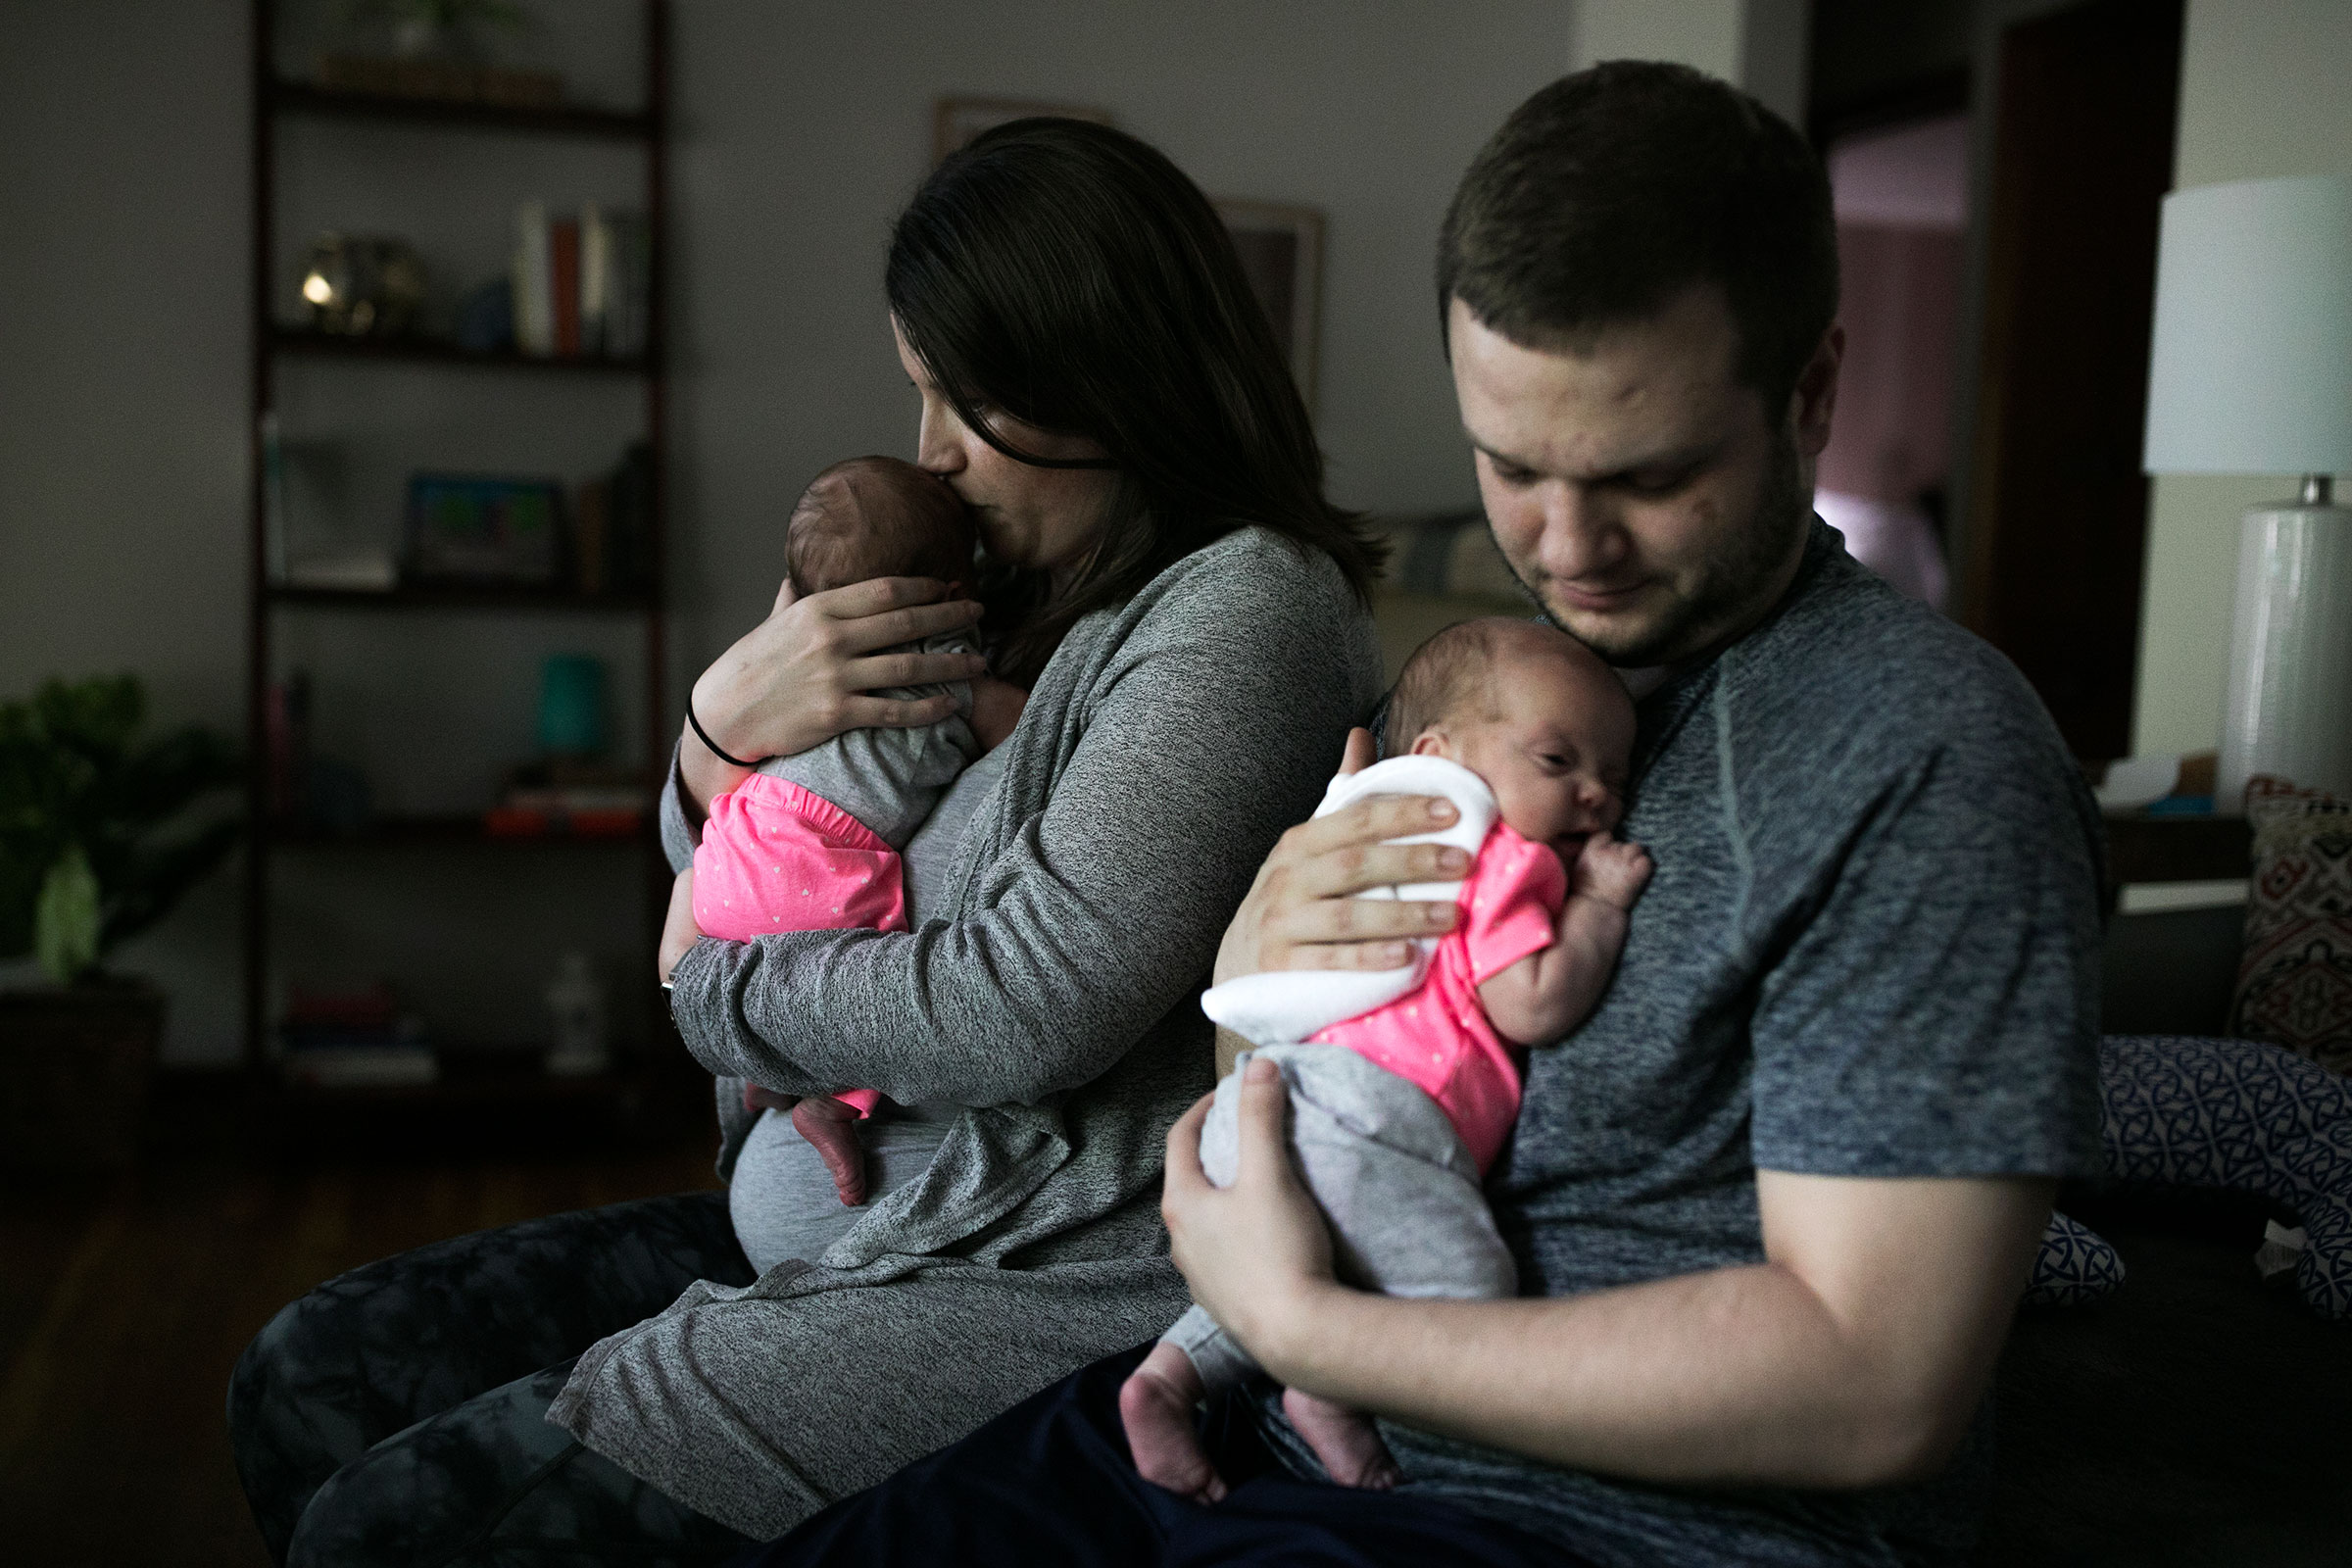 Morgan Lyles and her fiancé Chris comfort 10-week-old twins Maura and Lena in their Columbus, Ohio, home (Maddie McGarvey for TIME)